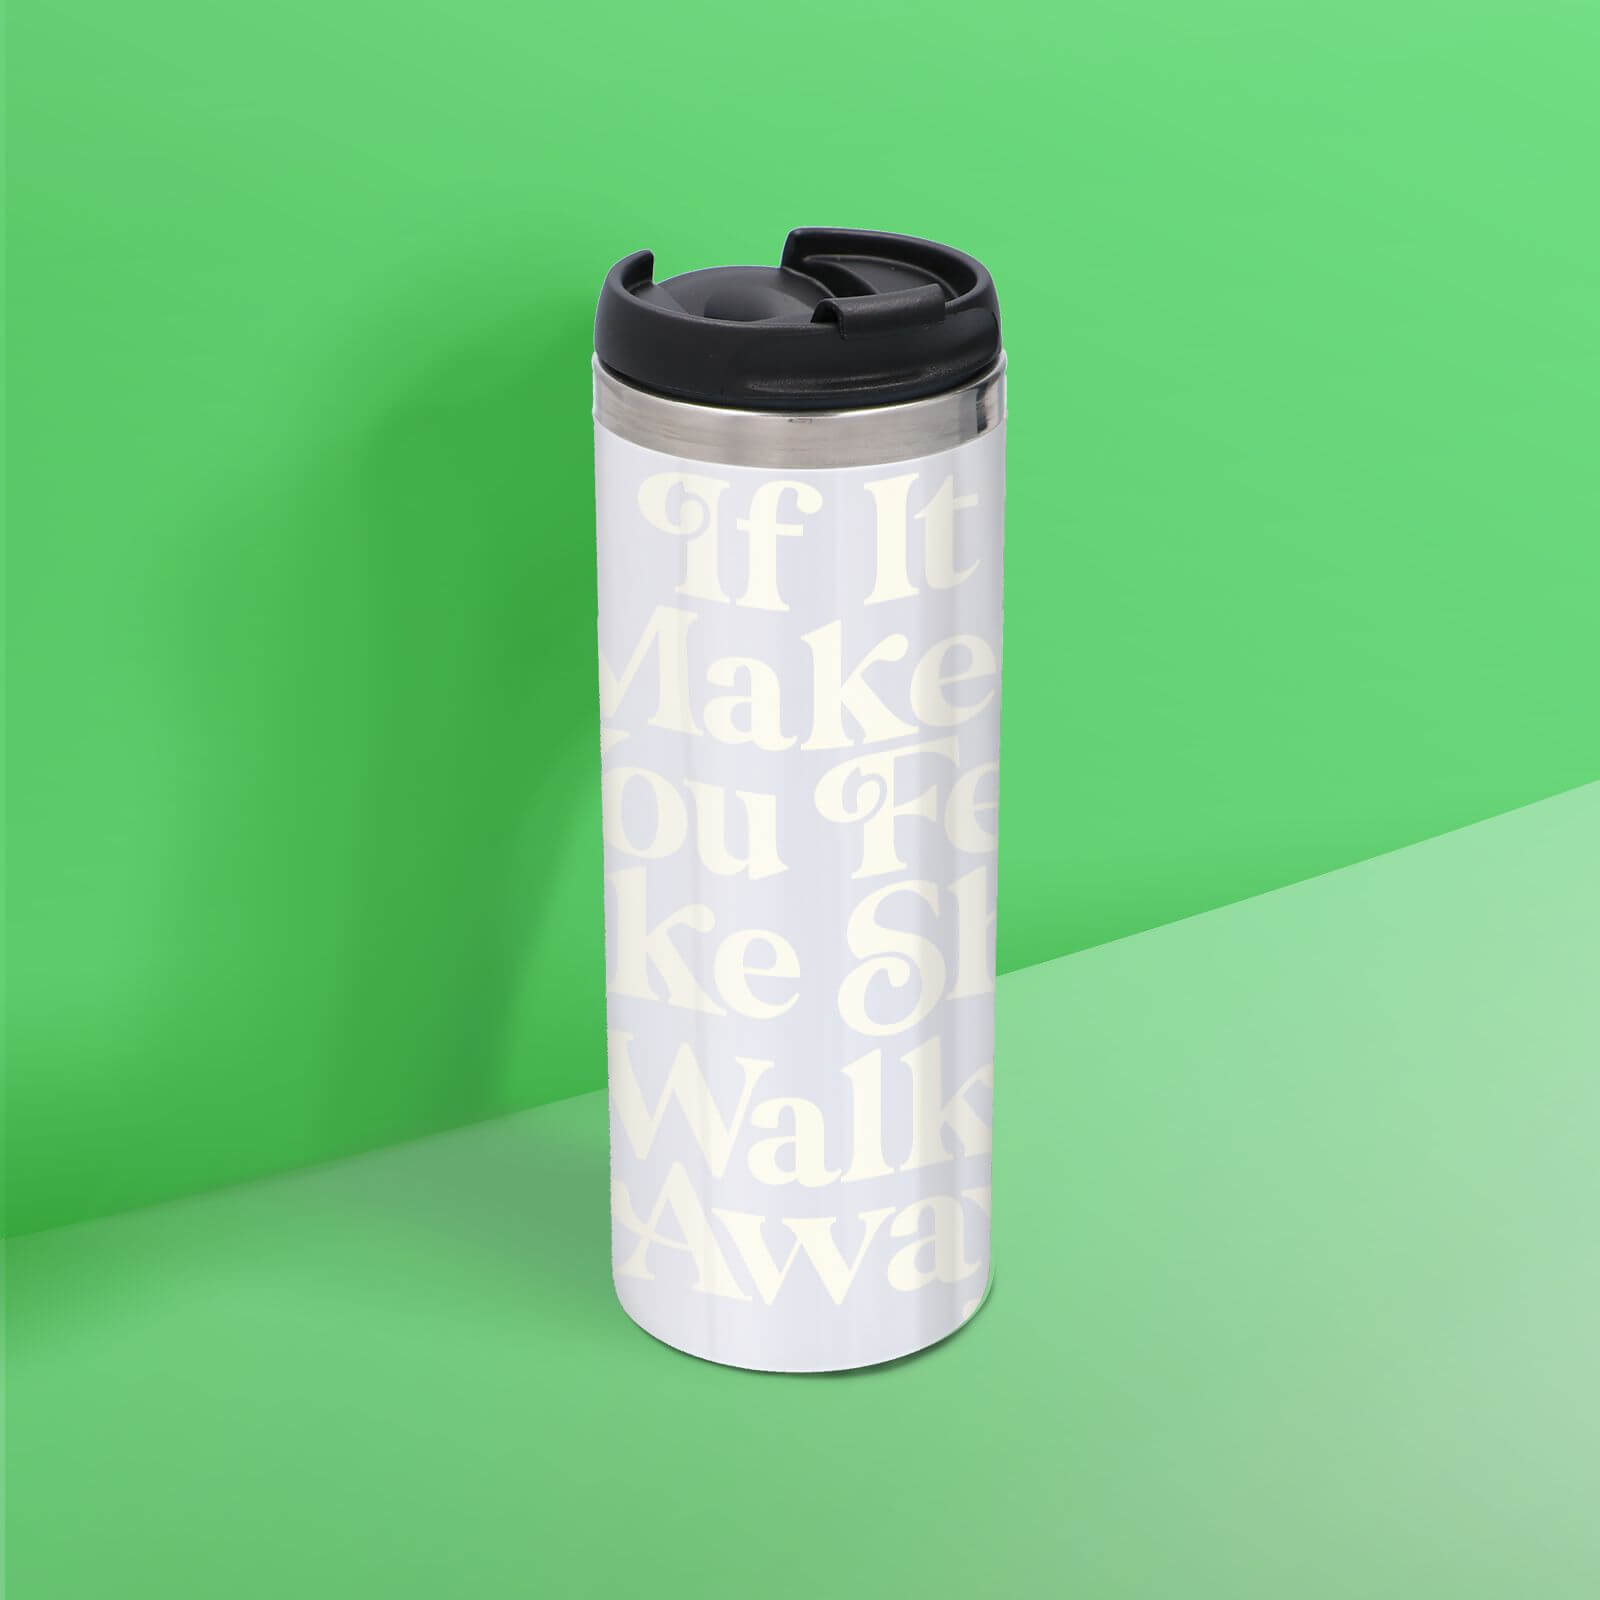 The Motivated Type If It Makes You Feel Like Shit Walk Away Thermo Travel Mug